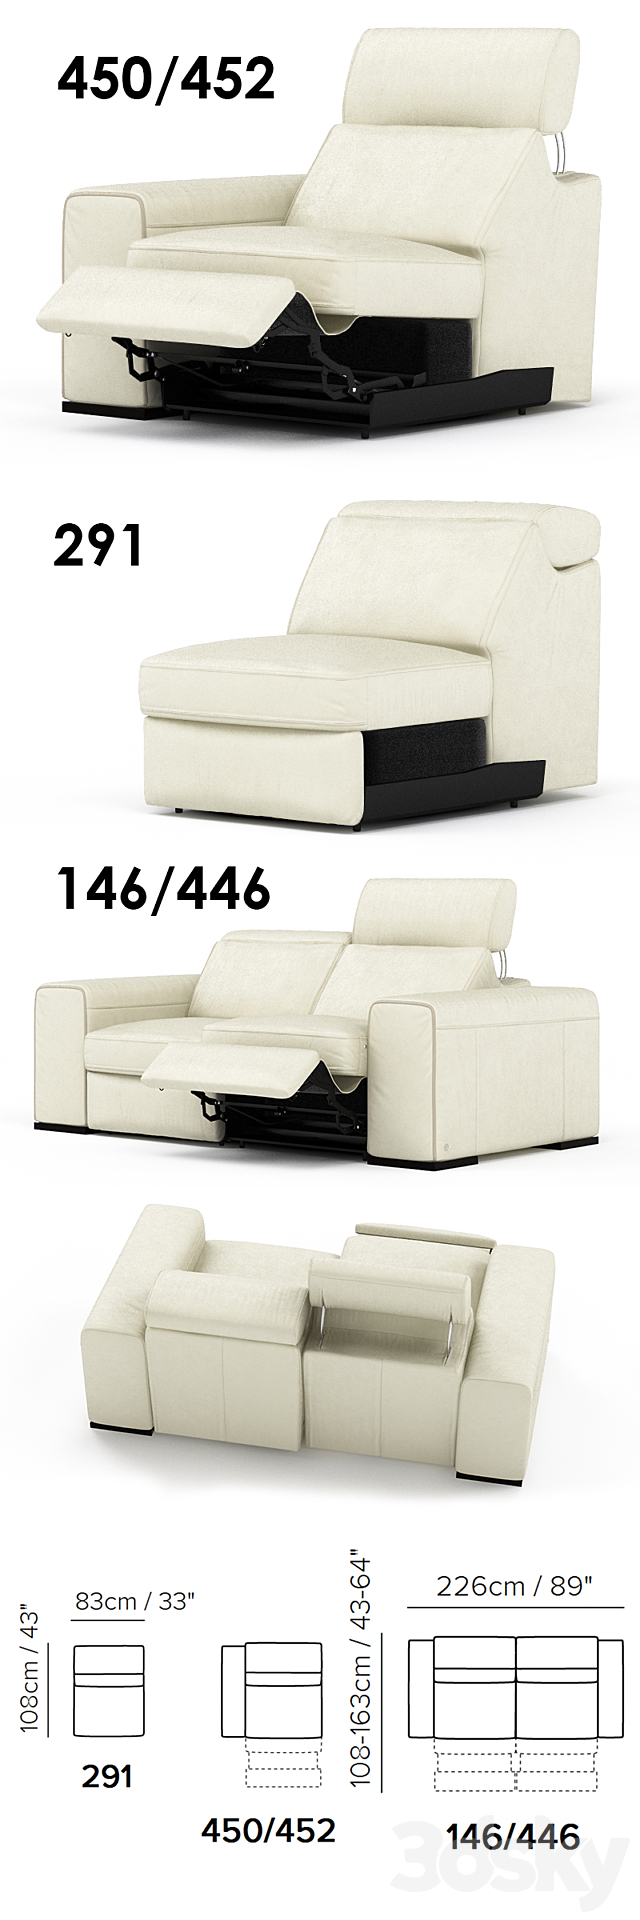 Remission To disable transfusion Sofa Natuzzi Clyde - Sofa - 3D Models